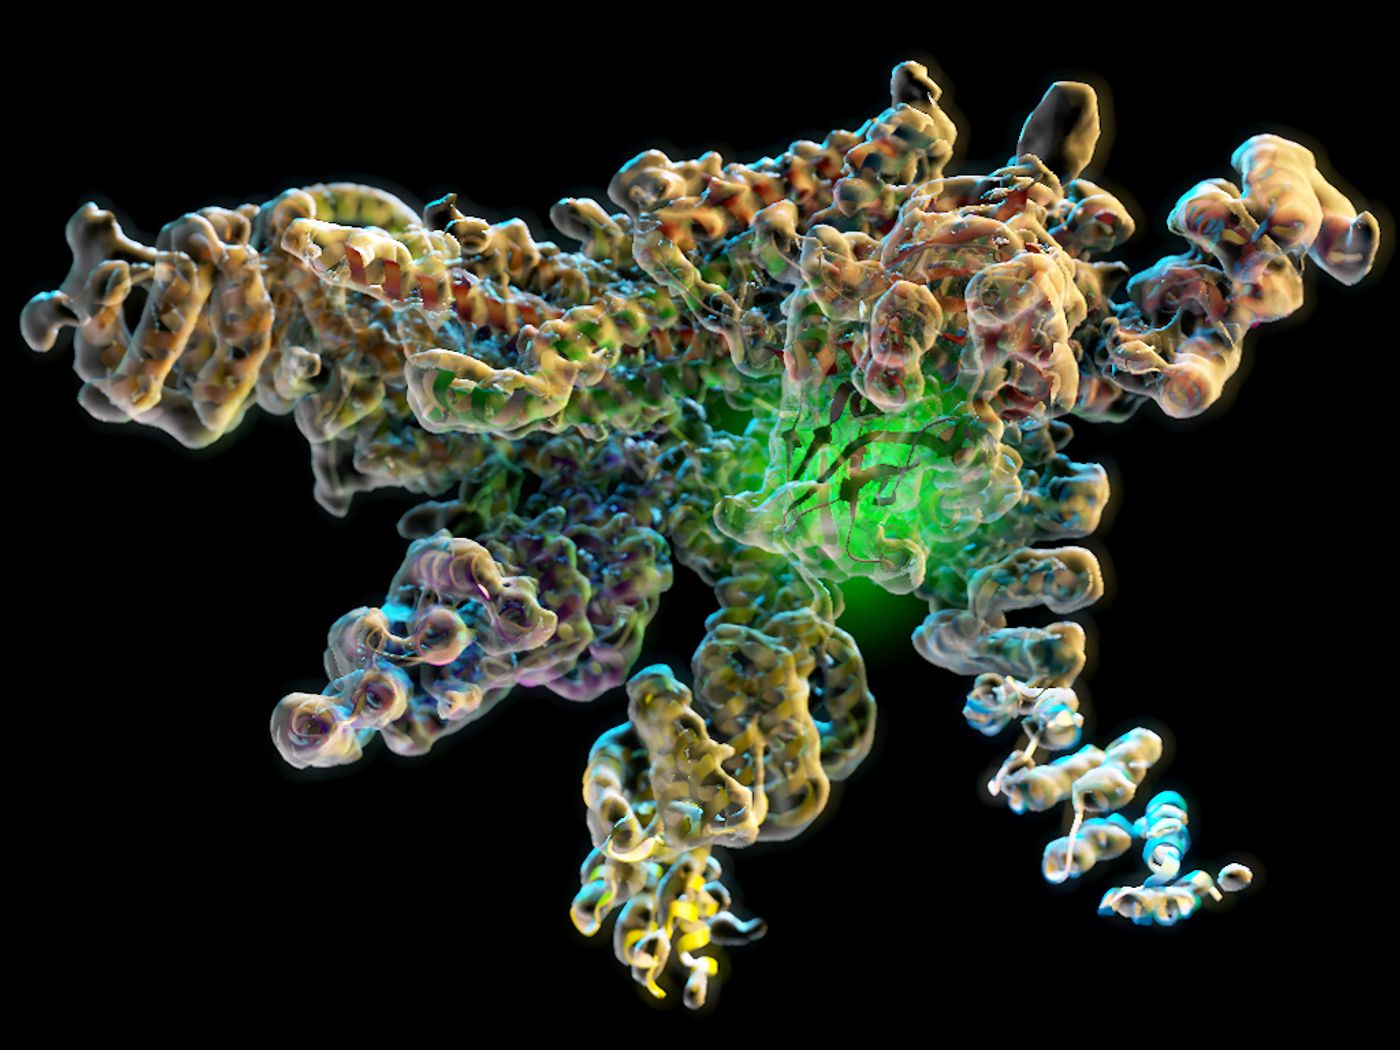 The new research shows the workings of a crucial molecular enzyme. In this image, the green glow in the structure denotes the location of the Rpn11 enzymatic active site in its inhibited conformation at the heart of the isolated lid complex.